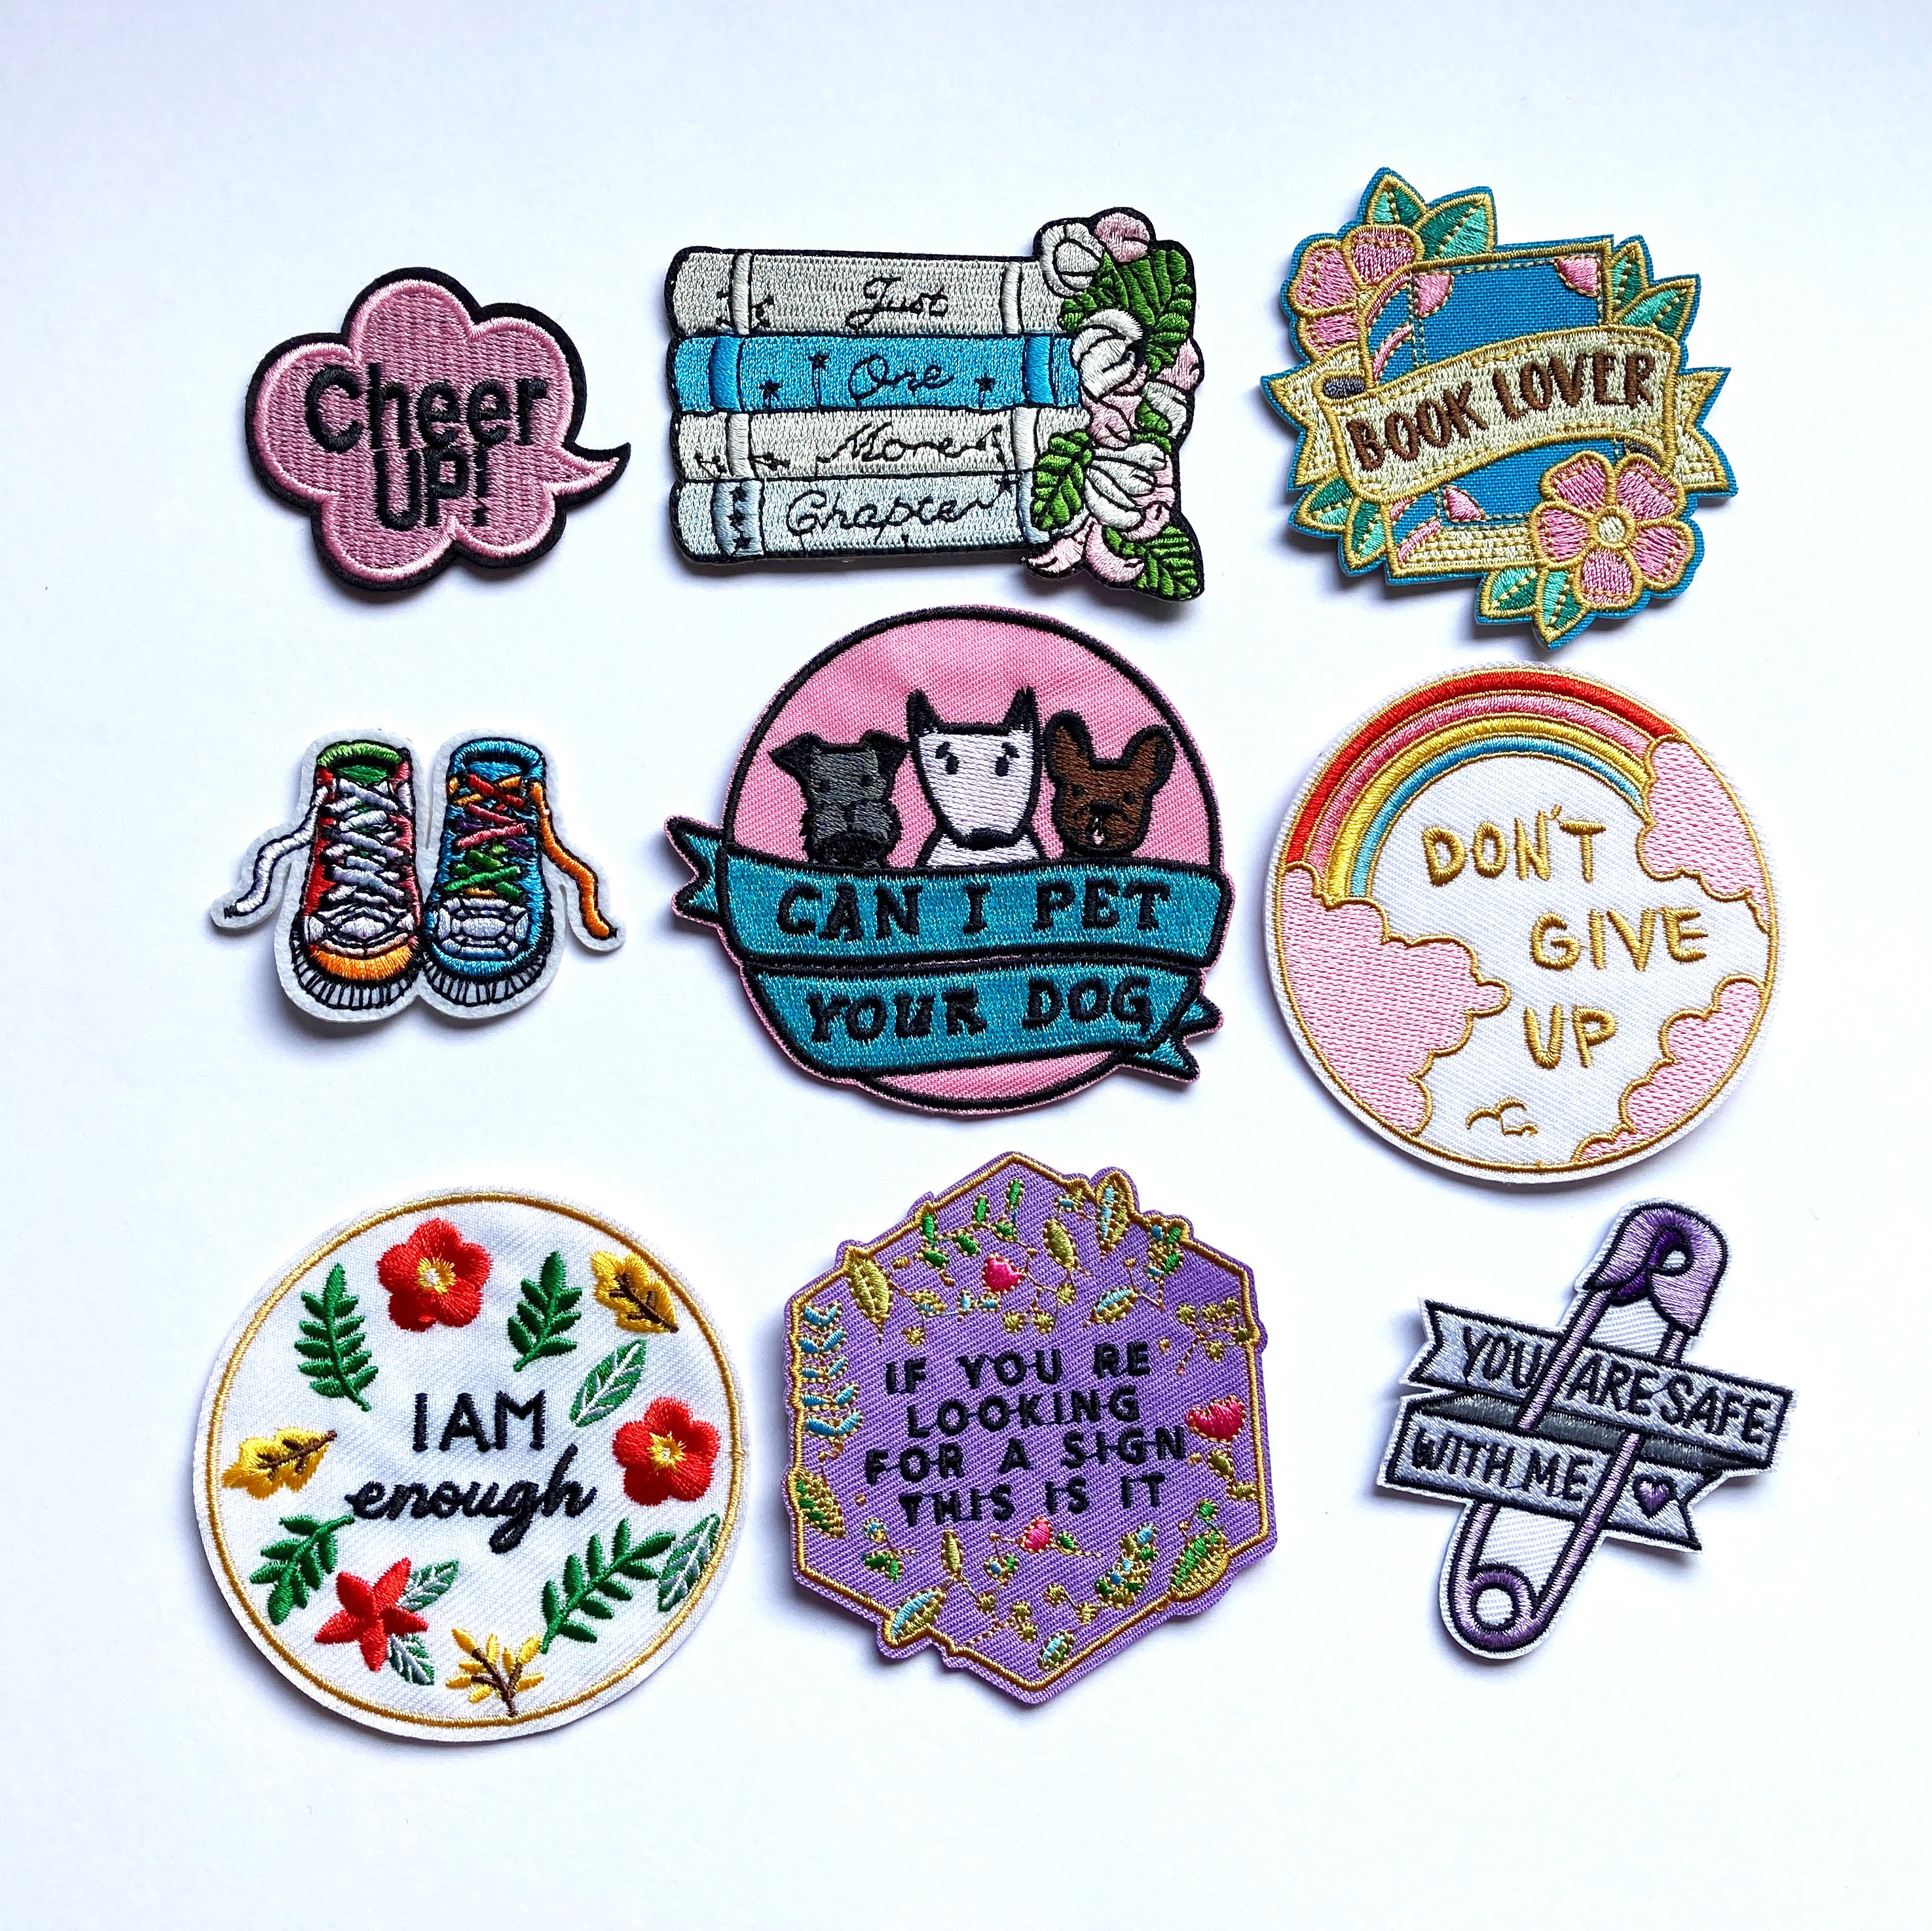 Cute Funny Patches, Books, Positivity, Retro, Embroidered Sew on / Iron on  Biker Nature Patch Badge Appliqué Jeans Bags Clothes Transfer 